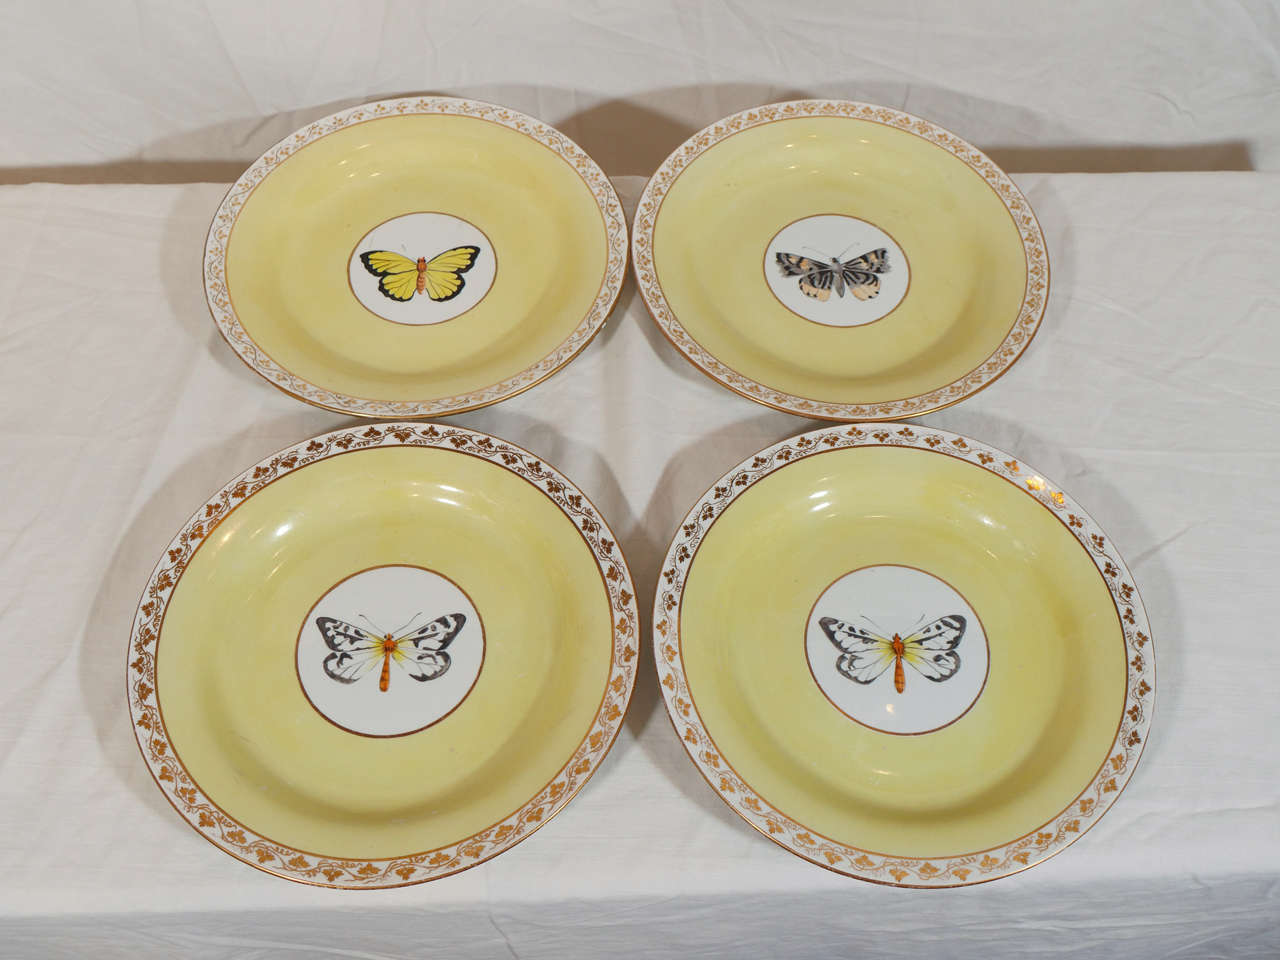 Set of Ten Wedgwood Dishes with Butterflies 1